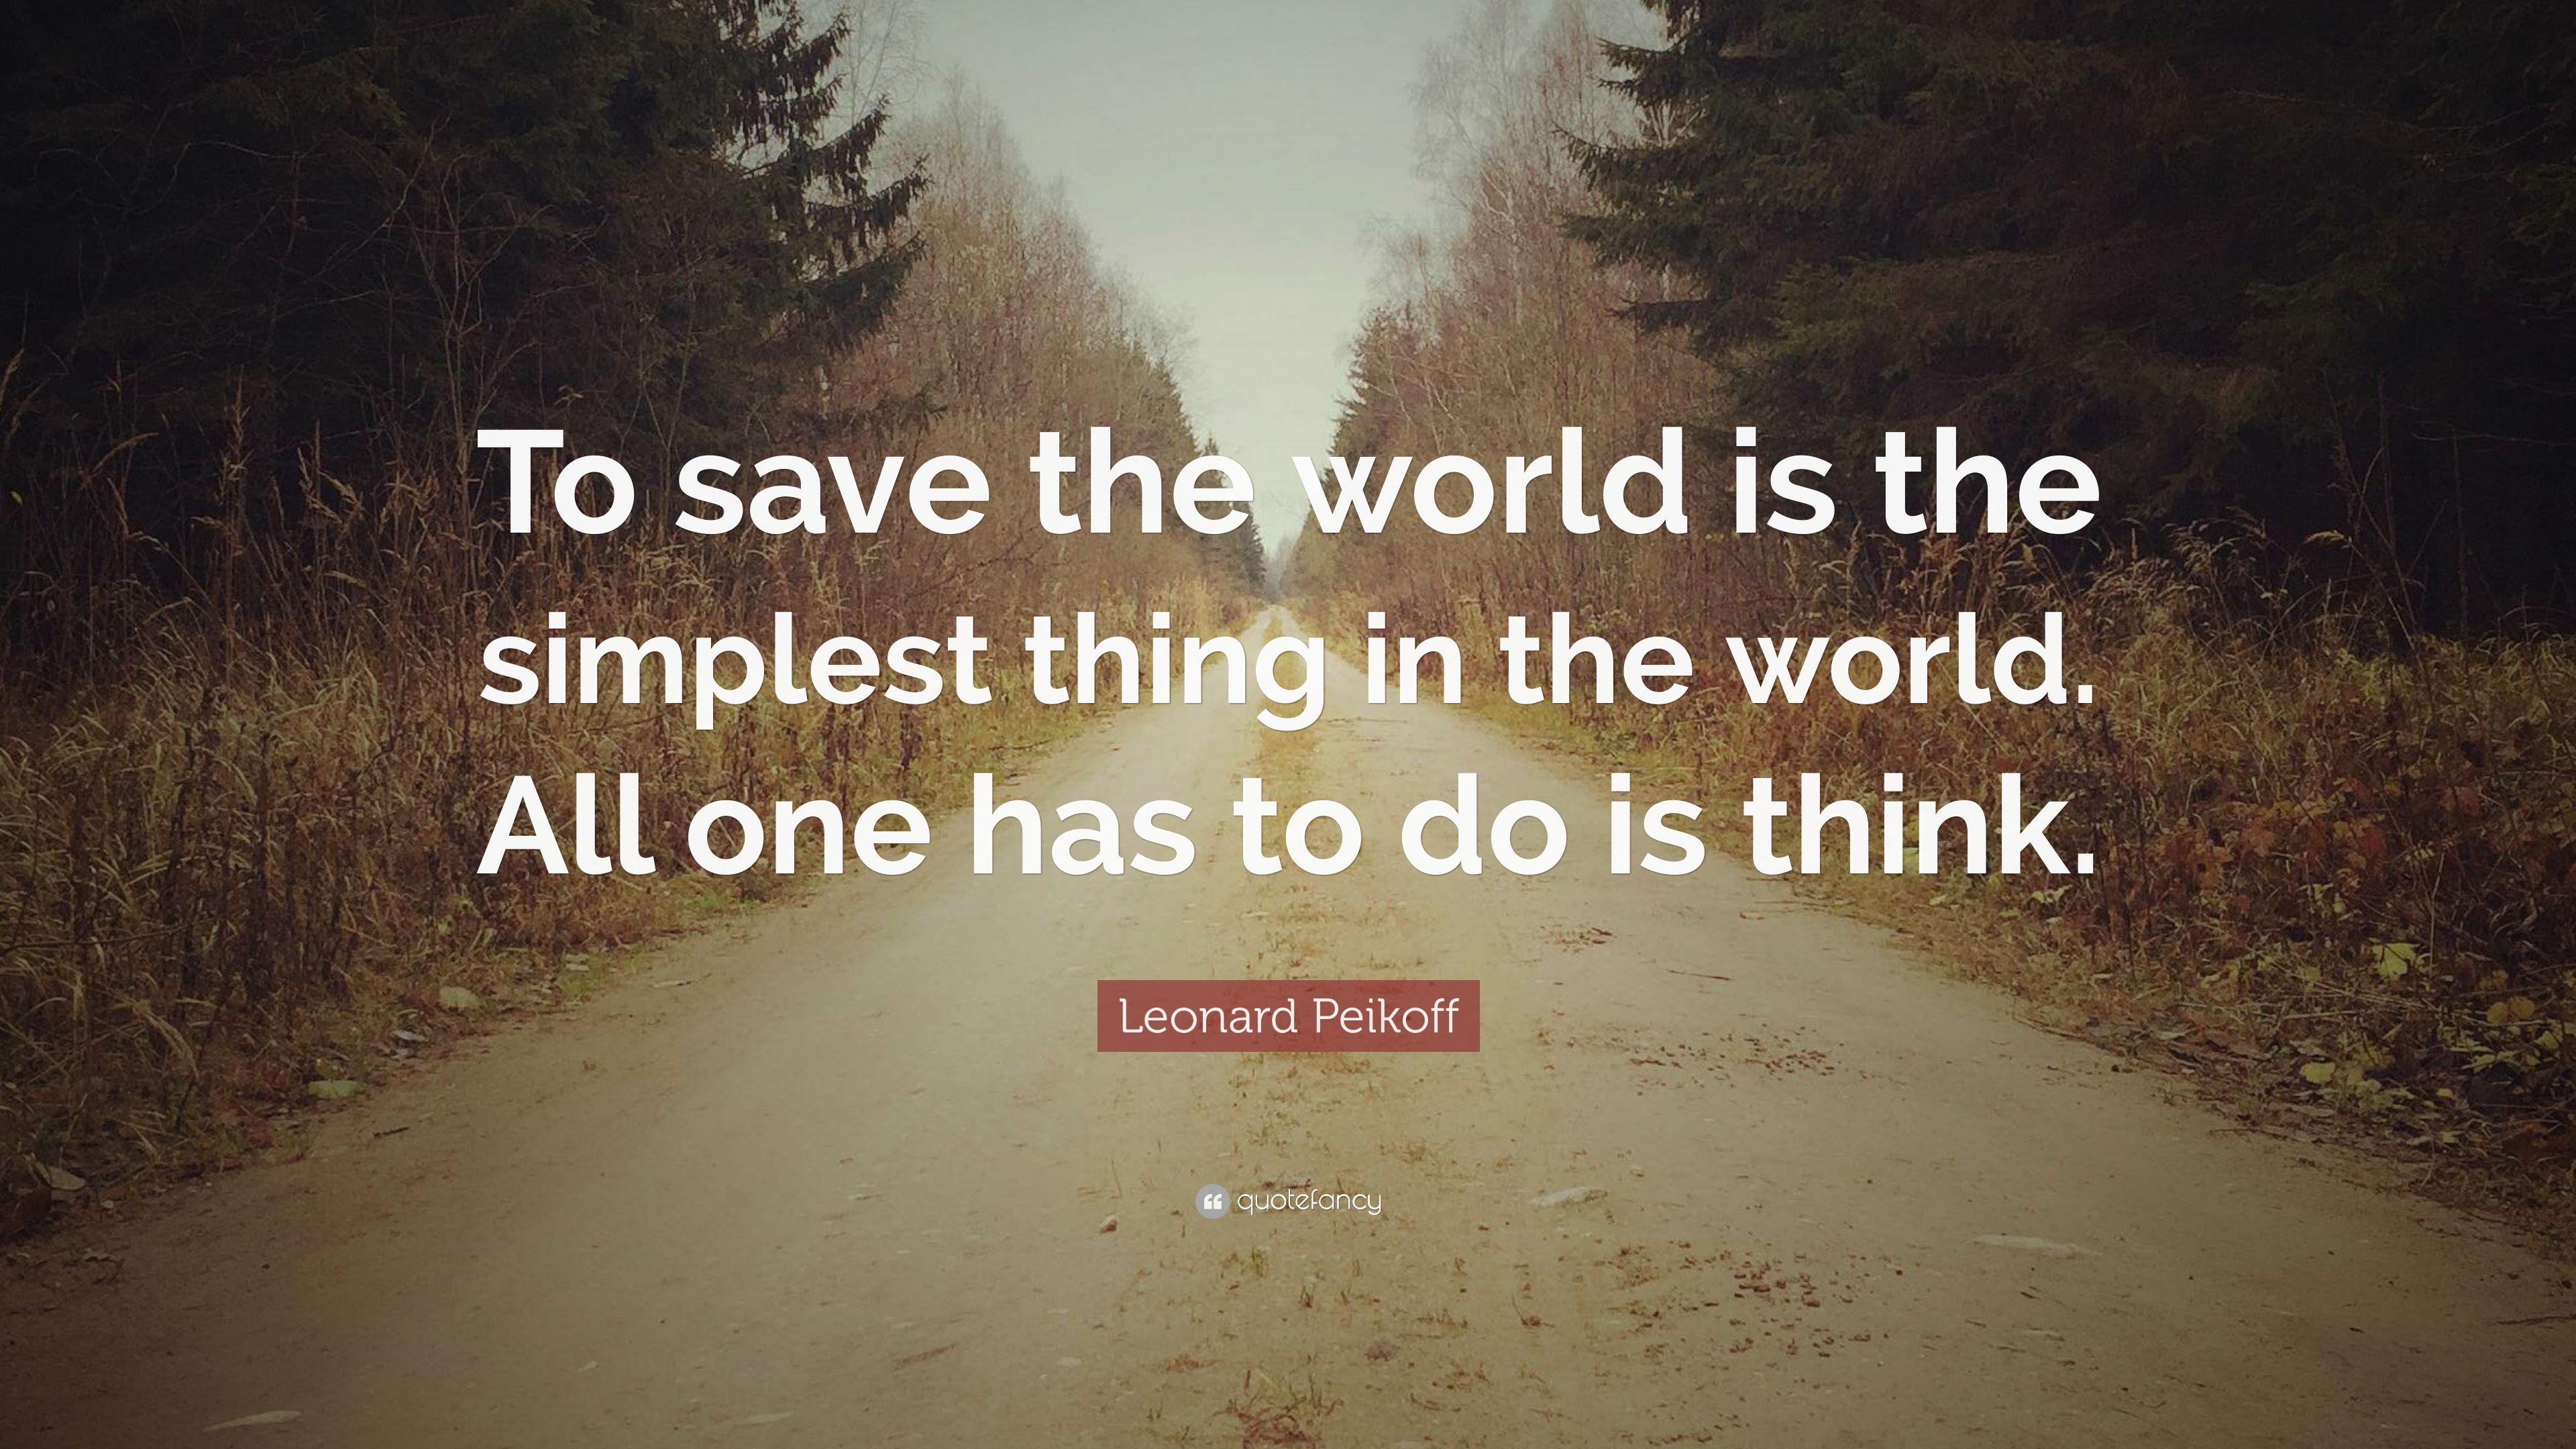 Leonard Peikoff Quote: “To save the world is the simplest thing